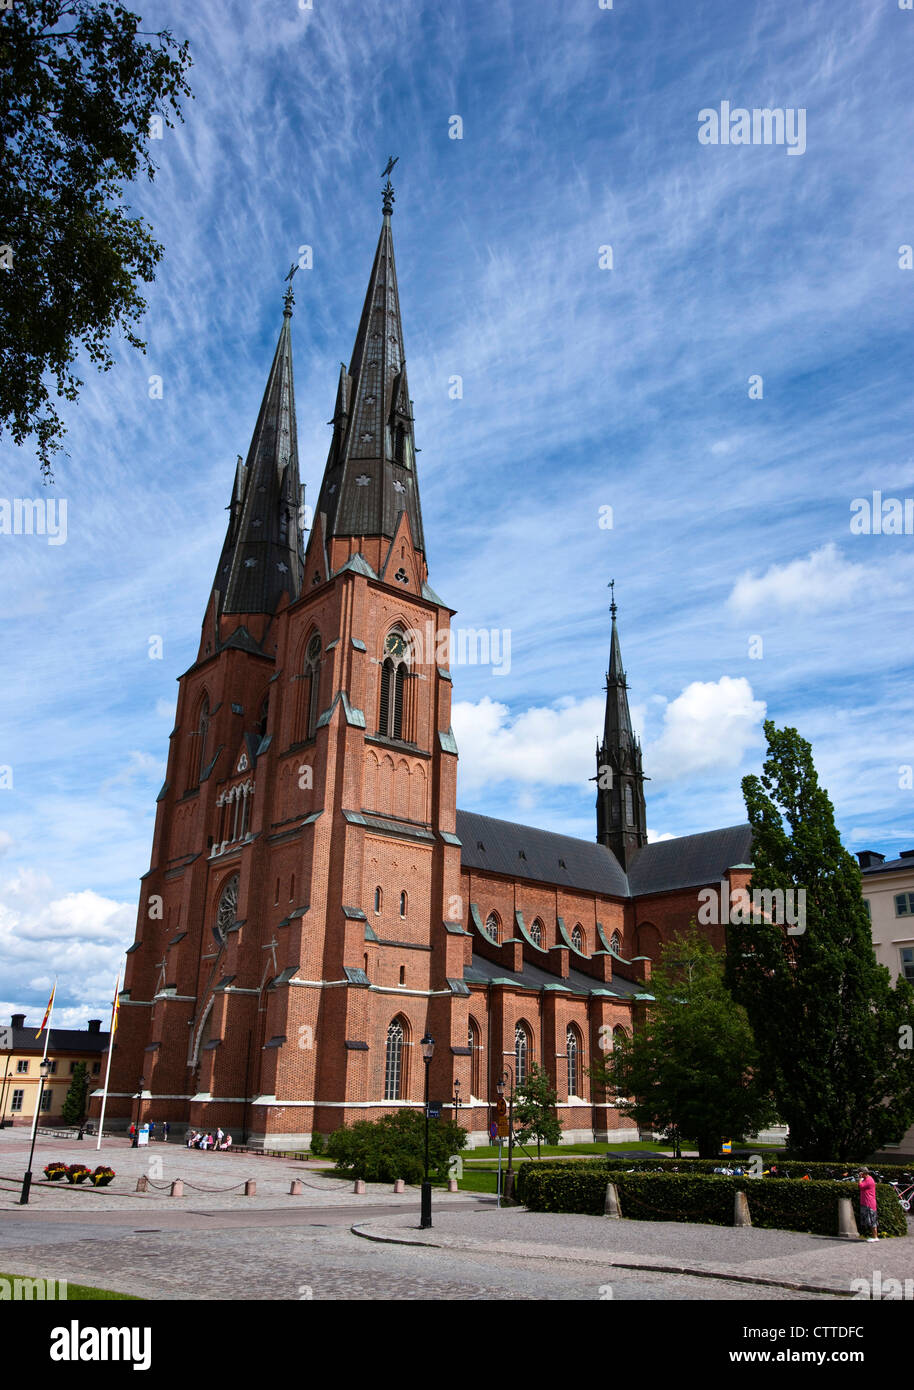 The gothic cathedral in Uppsala, Sweden. Stock Photo